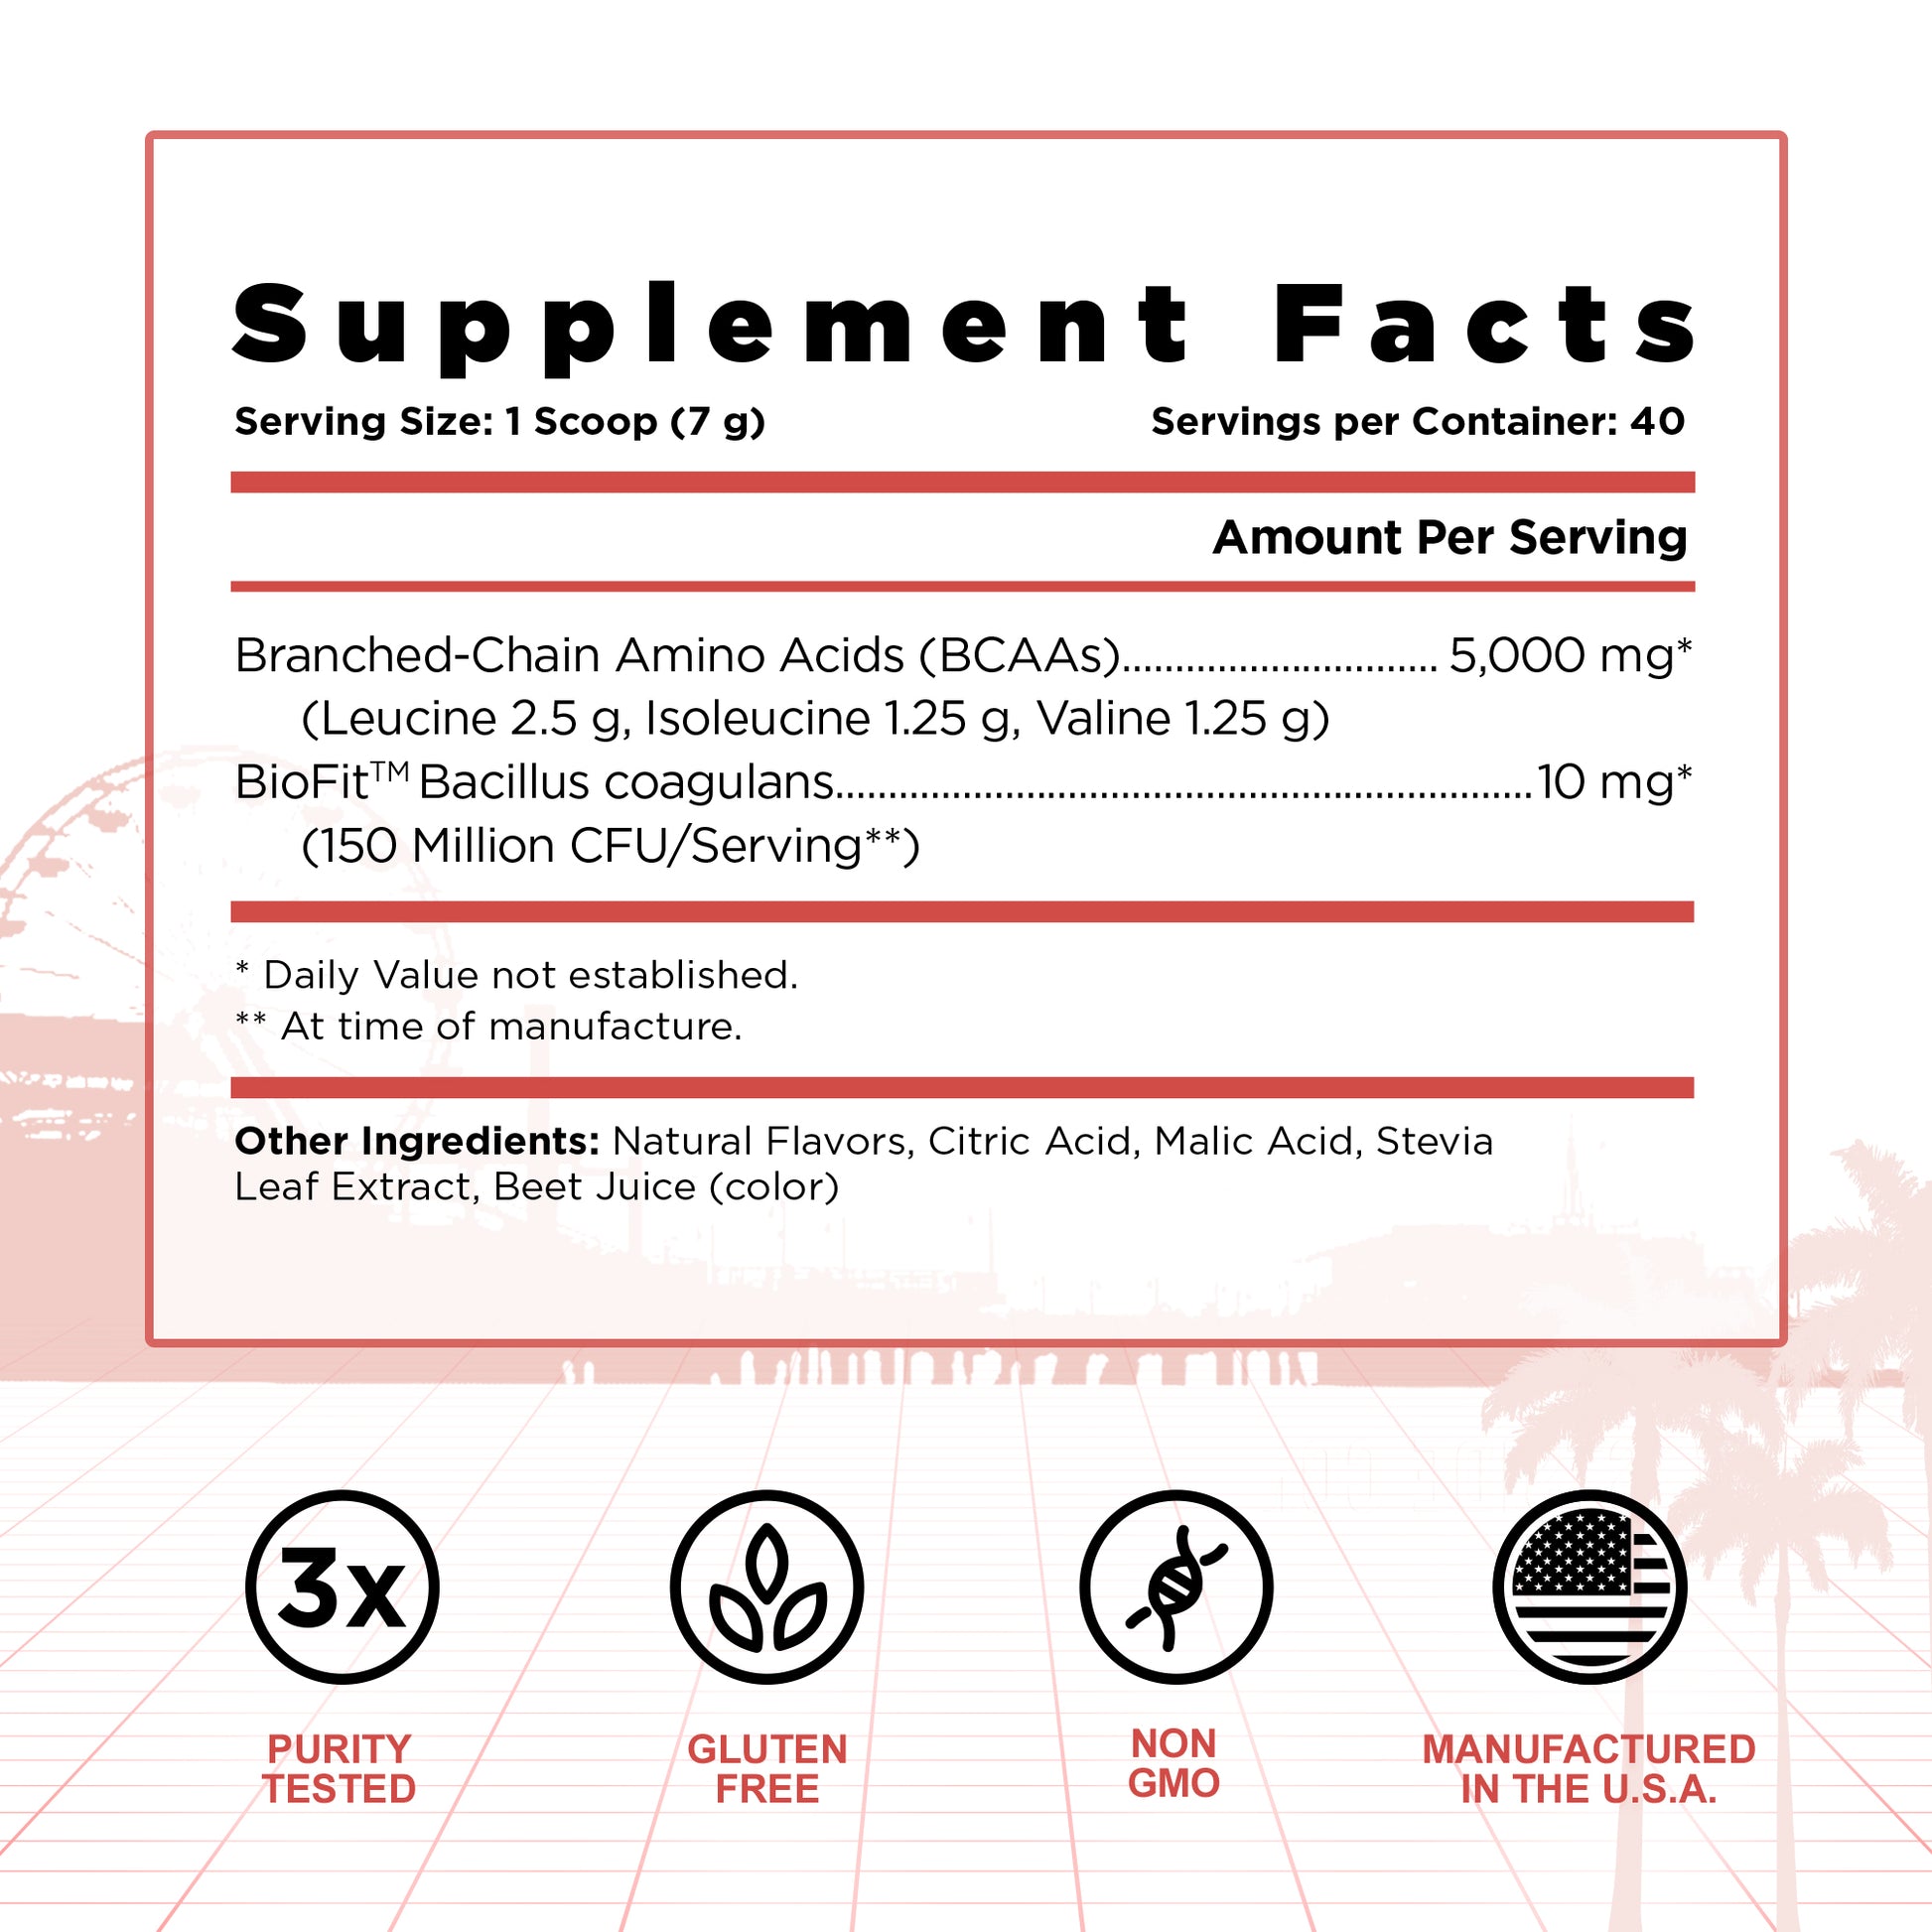 Classic BCAA supplement facts